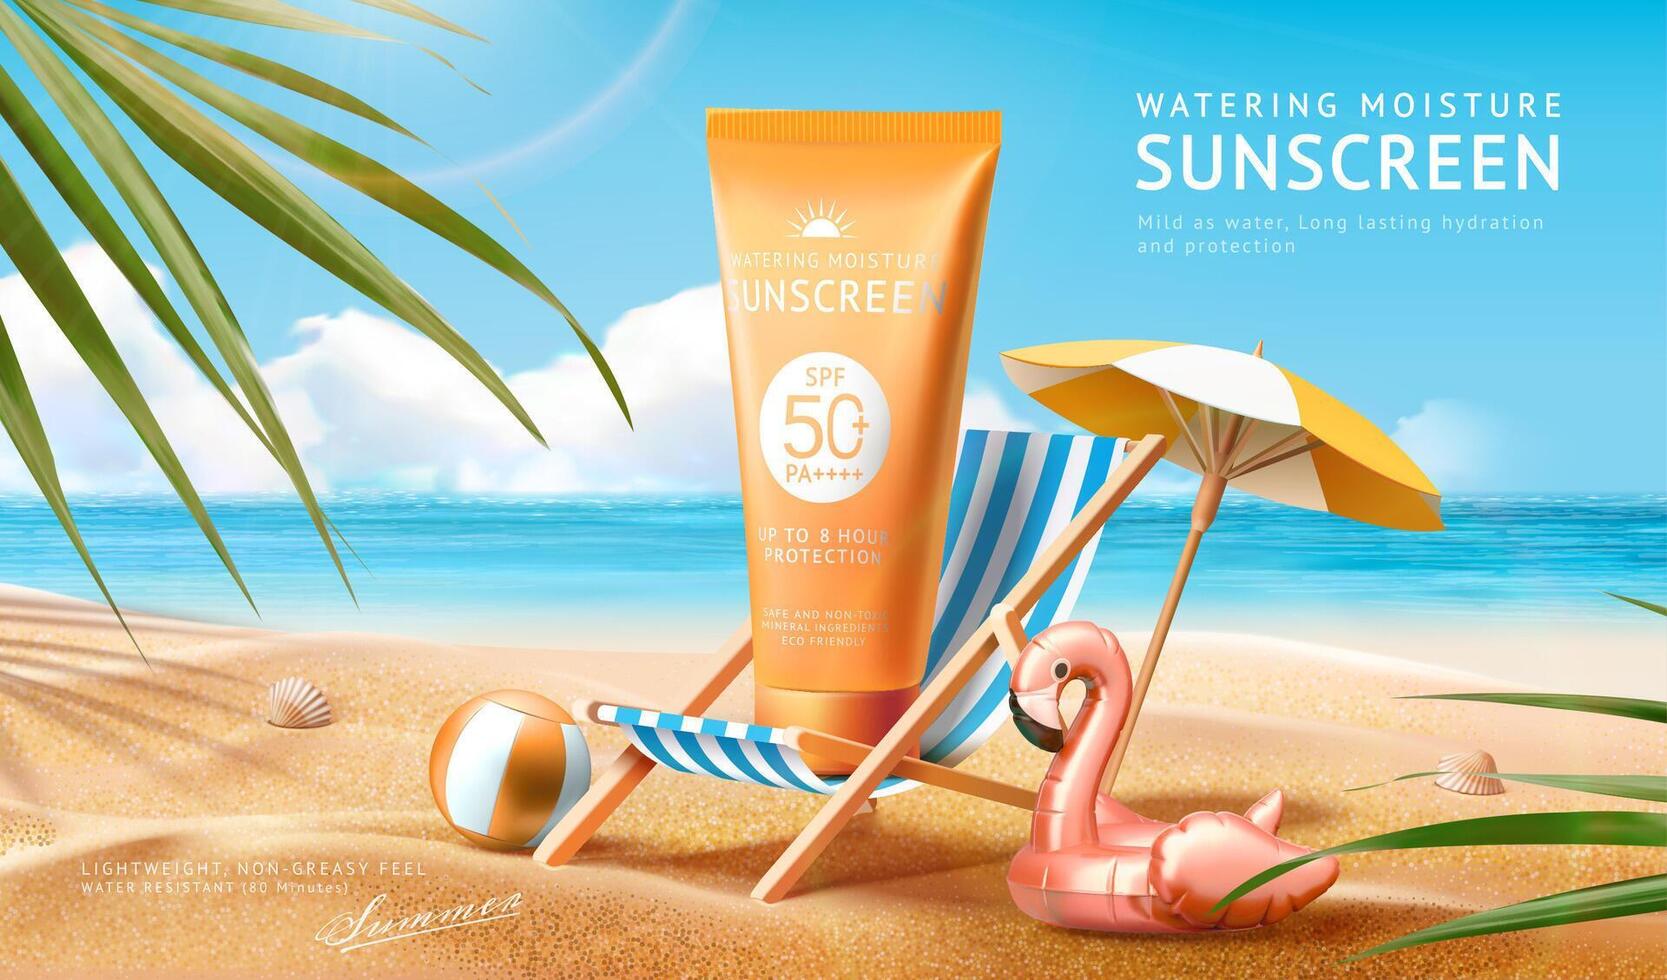 Sunscreen ad template with palm leaves and summer beach scene design, 3d illustration vector